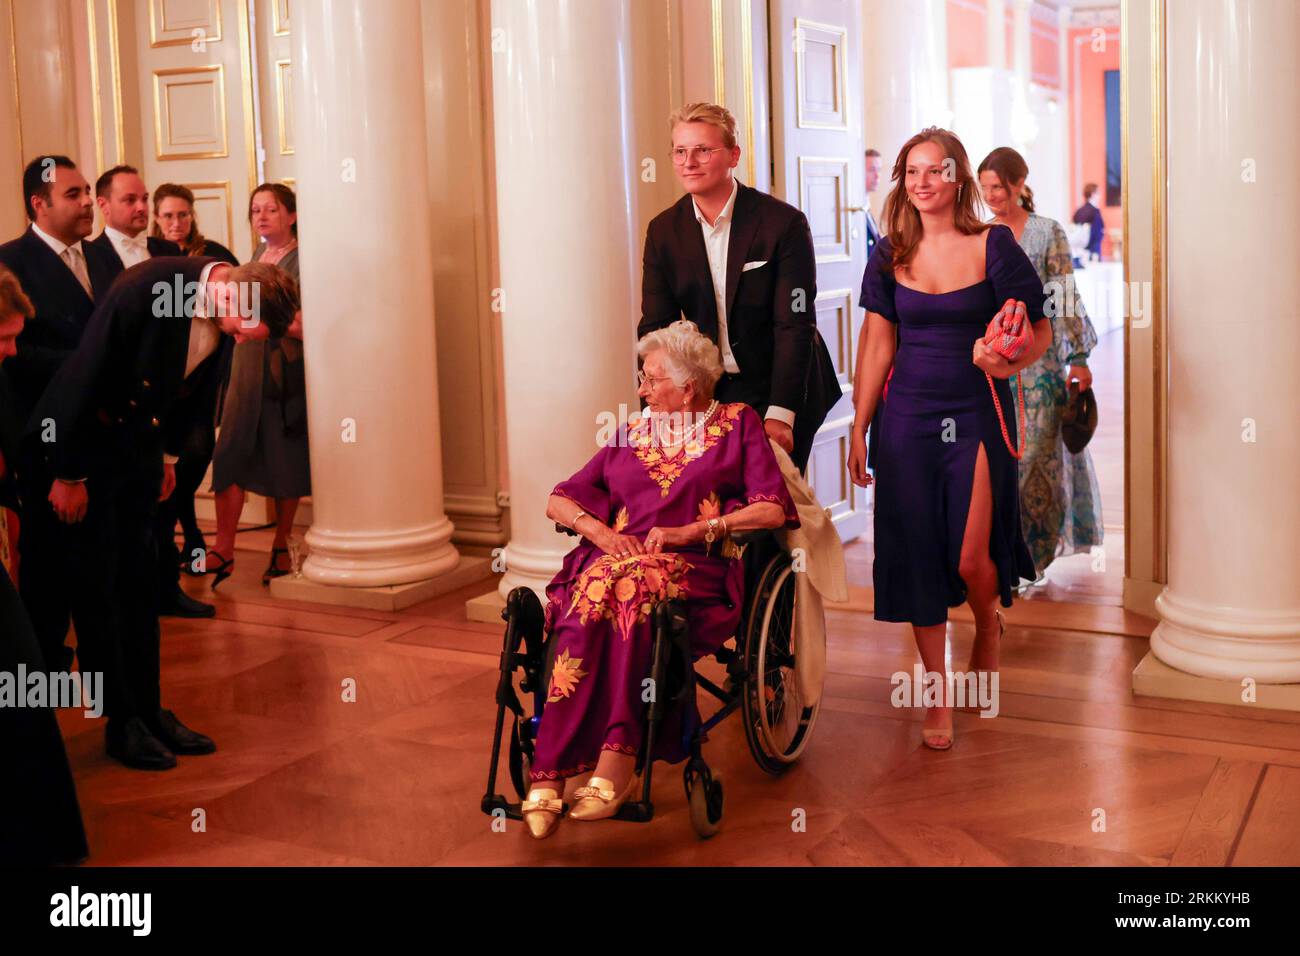 Oslo 20230825.Princess Astrid Mrs. Ferner, Prince Sverre Magnus and Princess Ingrid Alexandra of  Norway at the Royal Palace in Oslo on Friday. The party marks the crown prince couple's 50th birthday during the summer. Photo: Hanna Johre / NTB / POOL Stock Photo